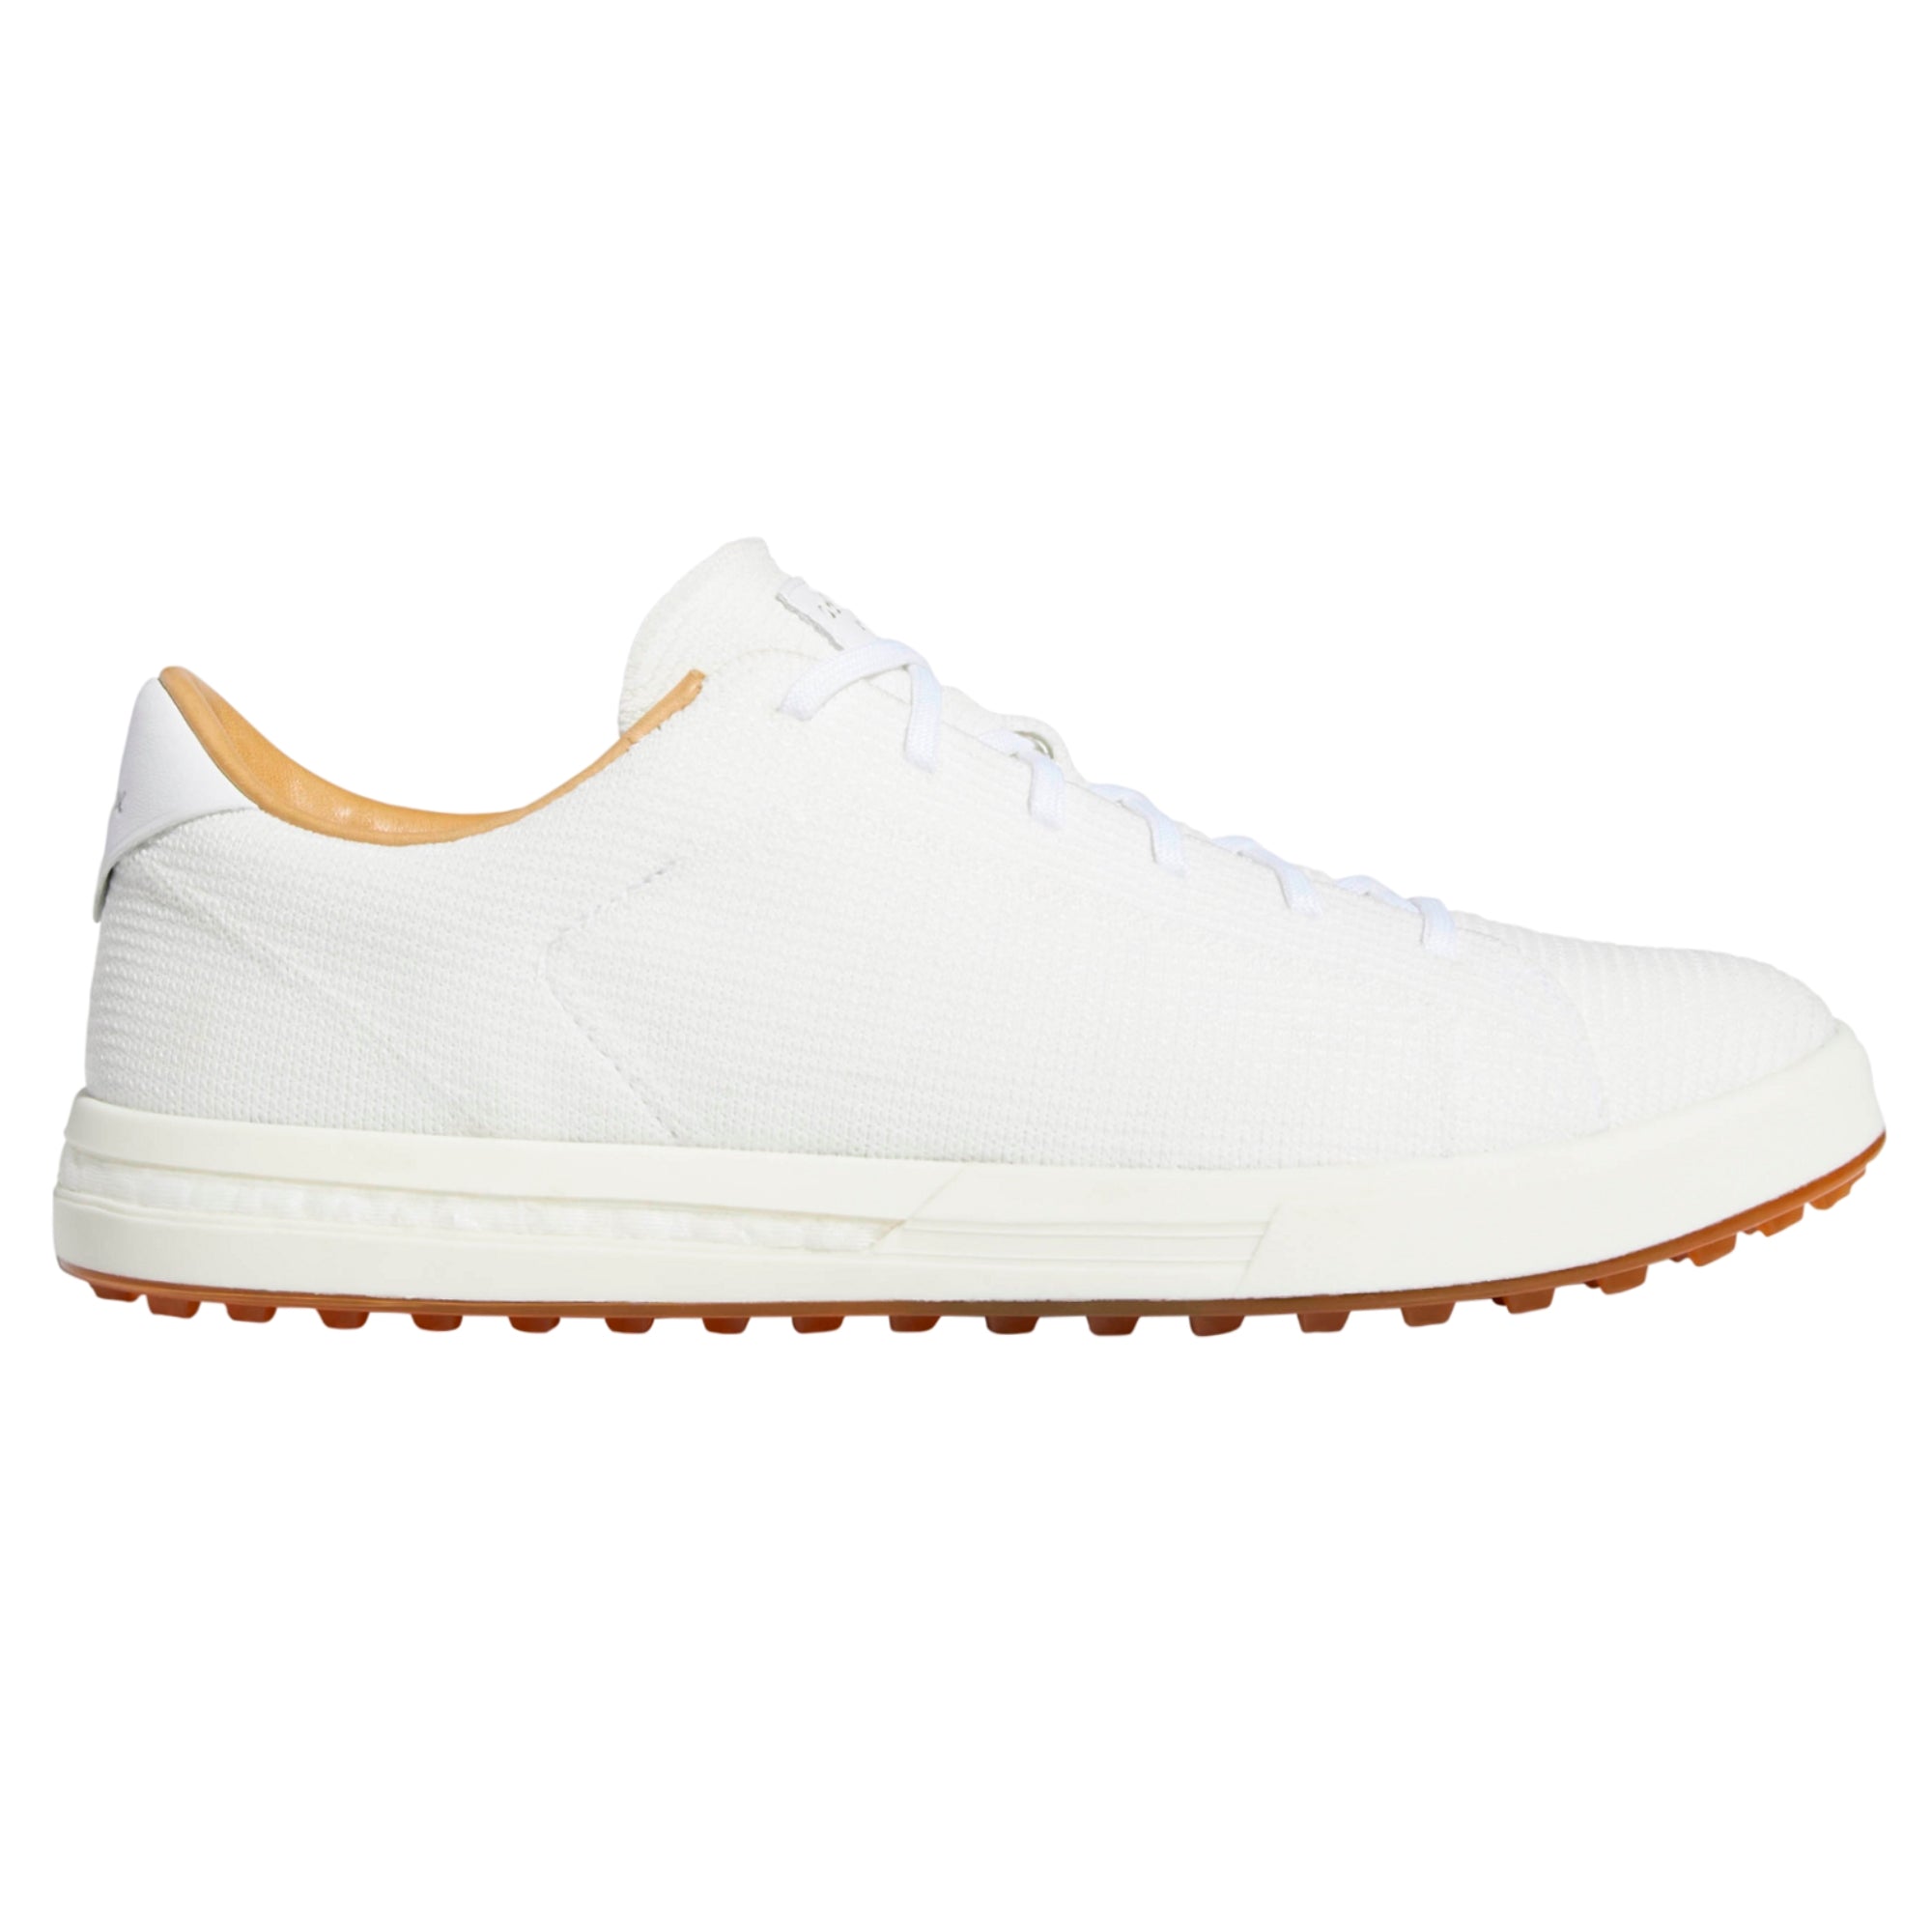 adidas AdiPure SP Knit Golf Shoes 